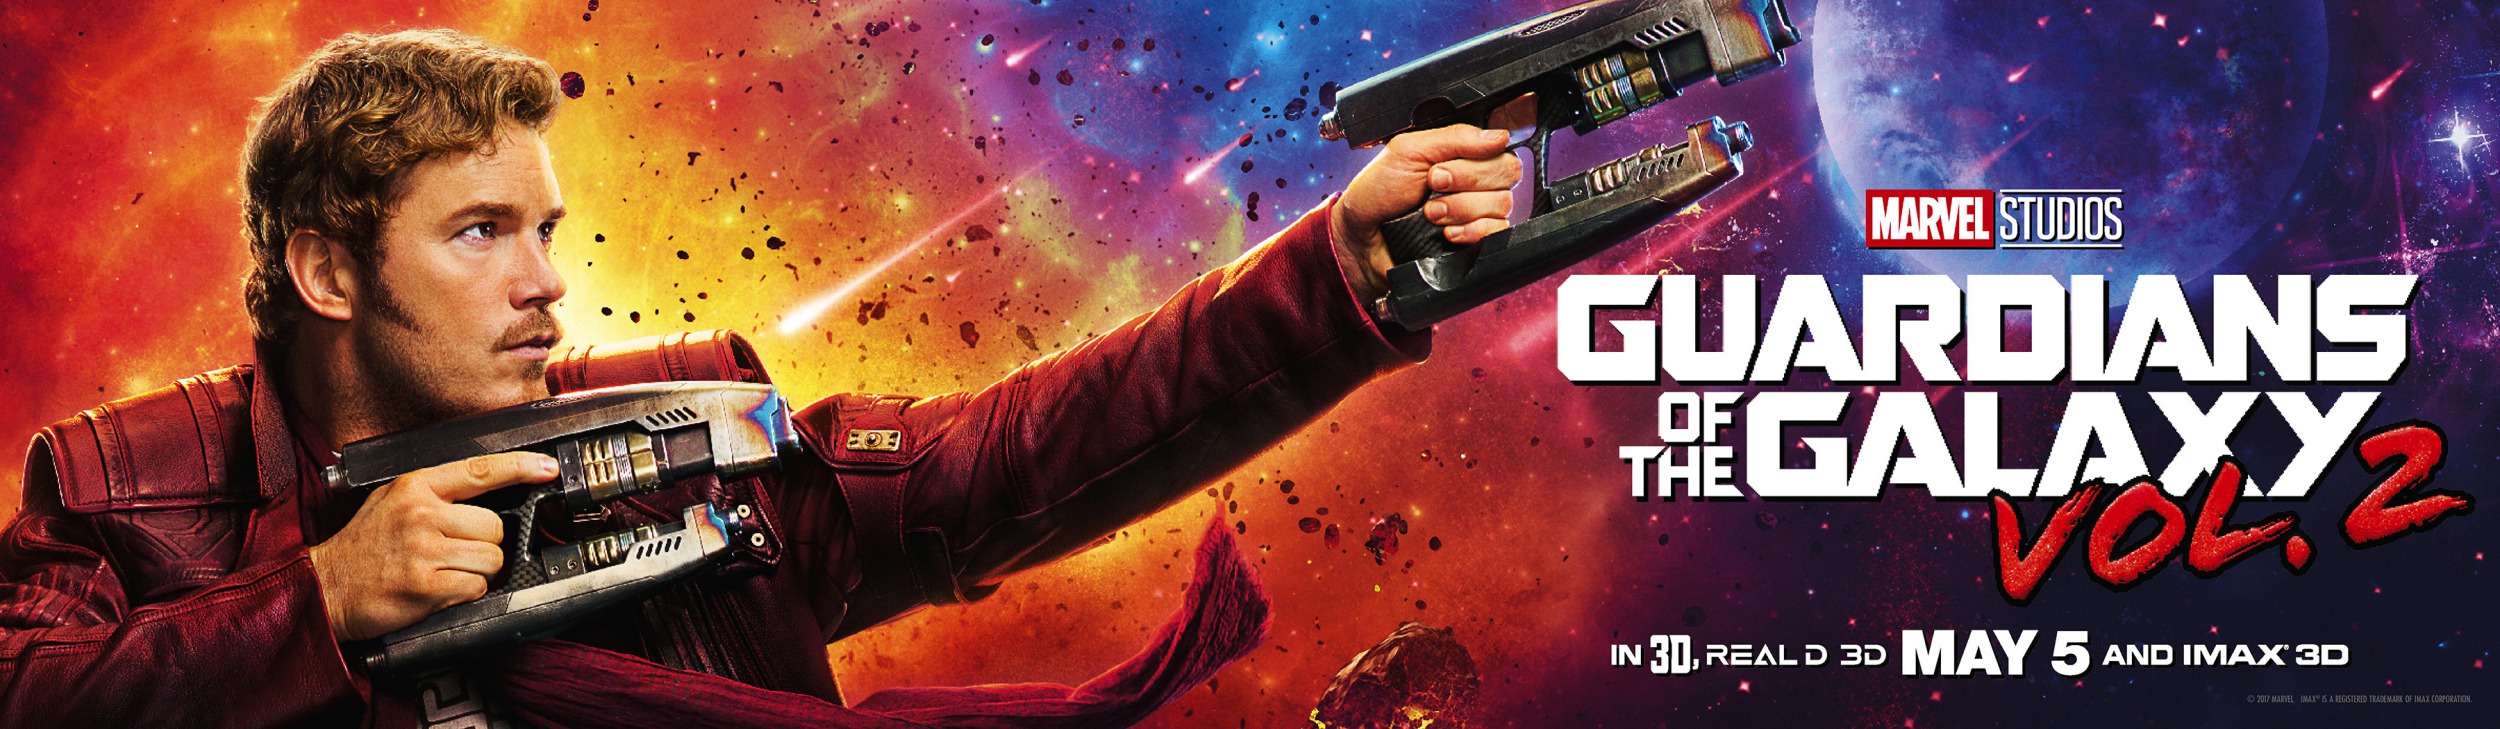 Mega Sized Movie Poster Image for Guardians of the Galaxy Vol. 2 (#34 of 45)